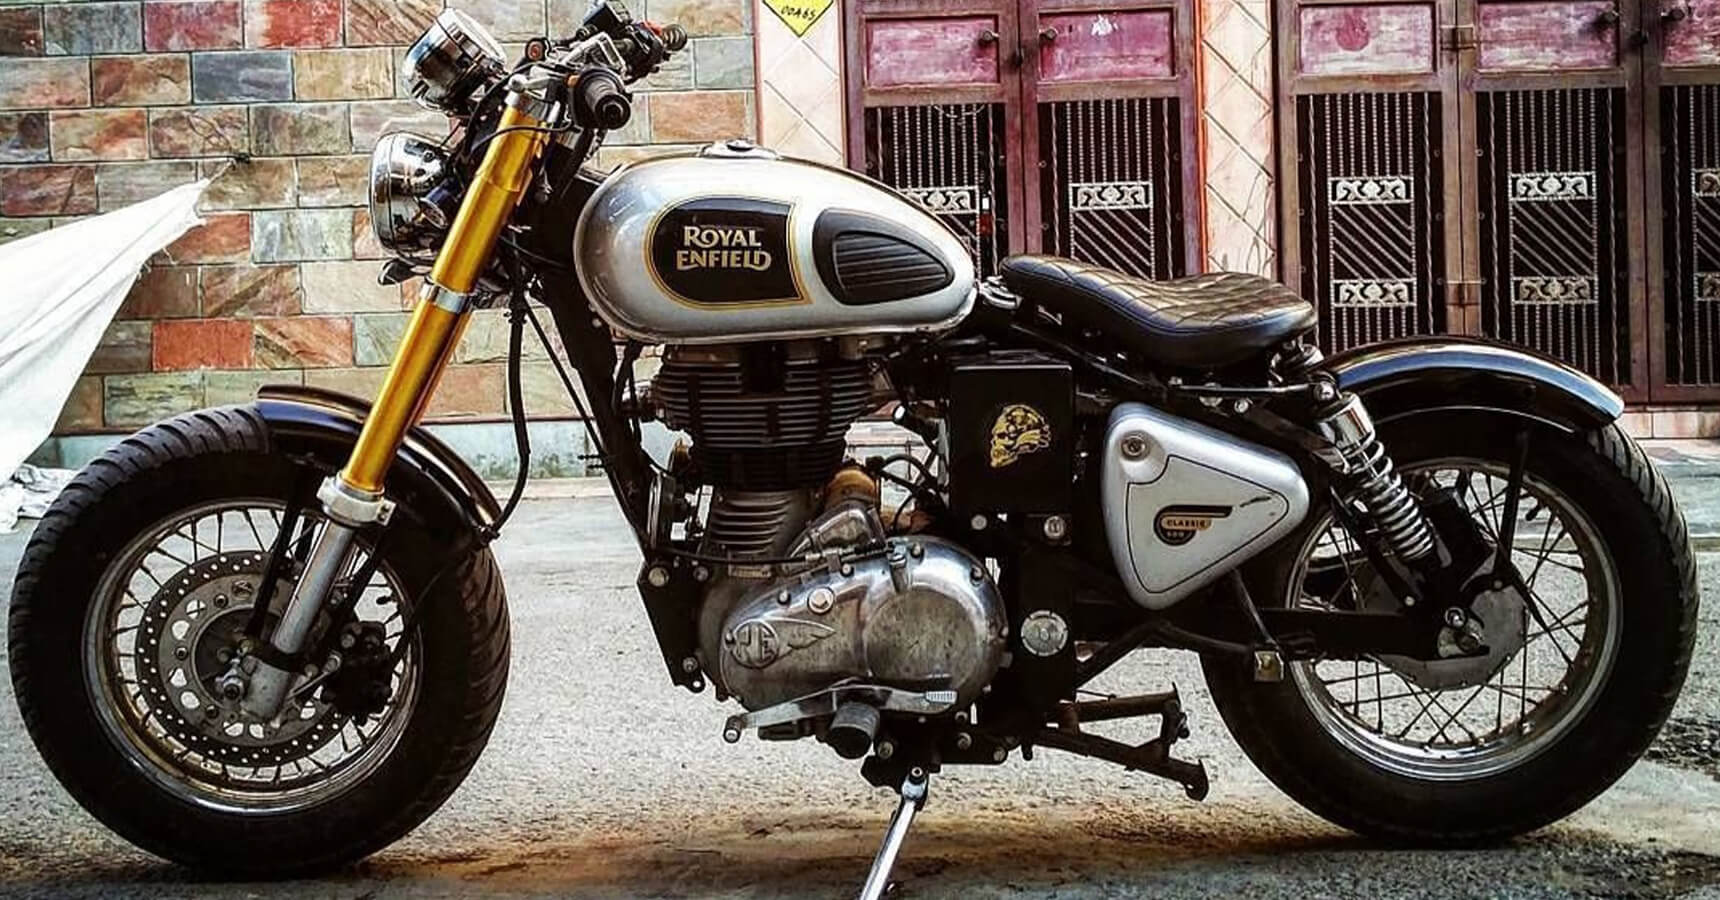 Royal Enfield launch 3 new Motorcycles this year